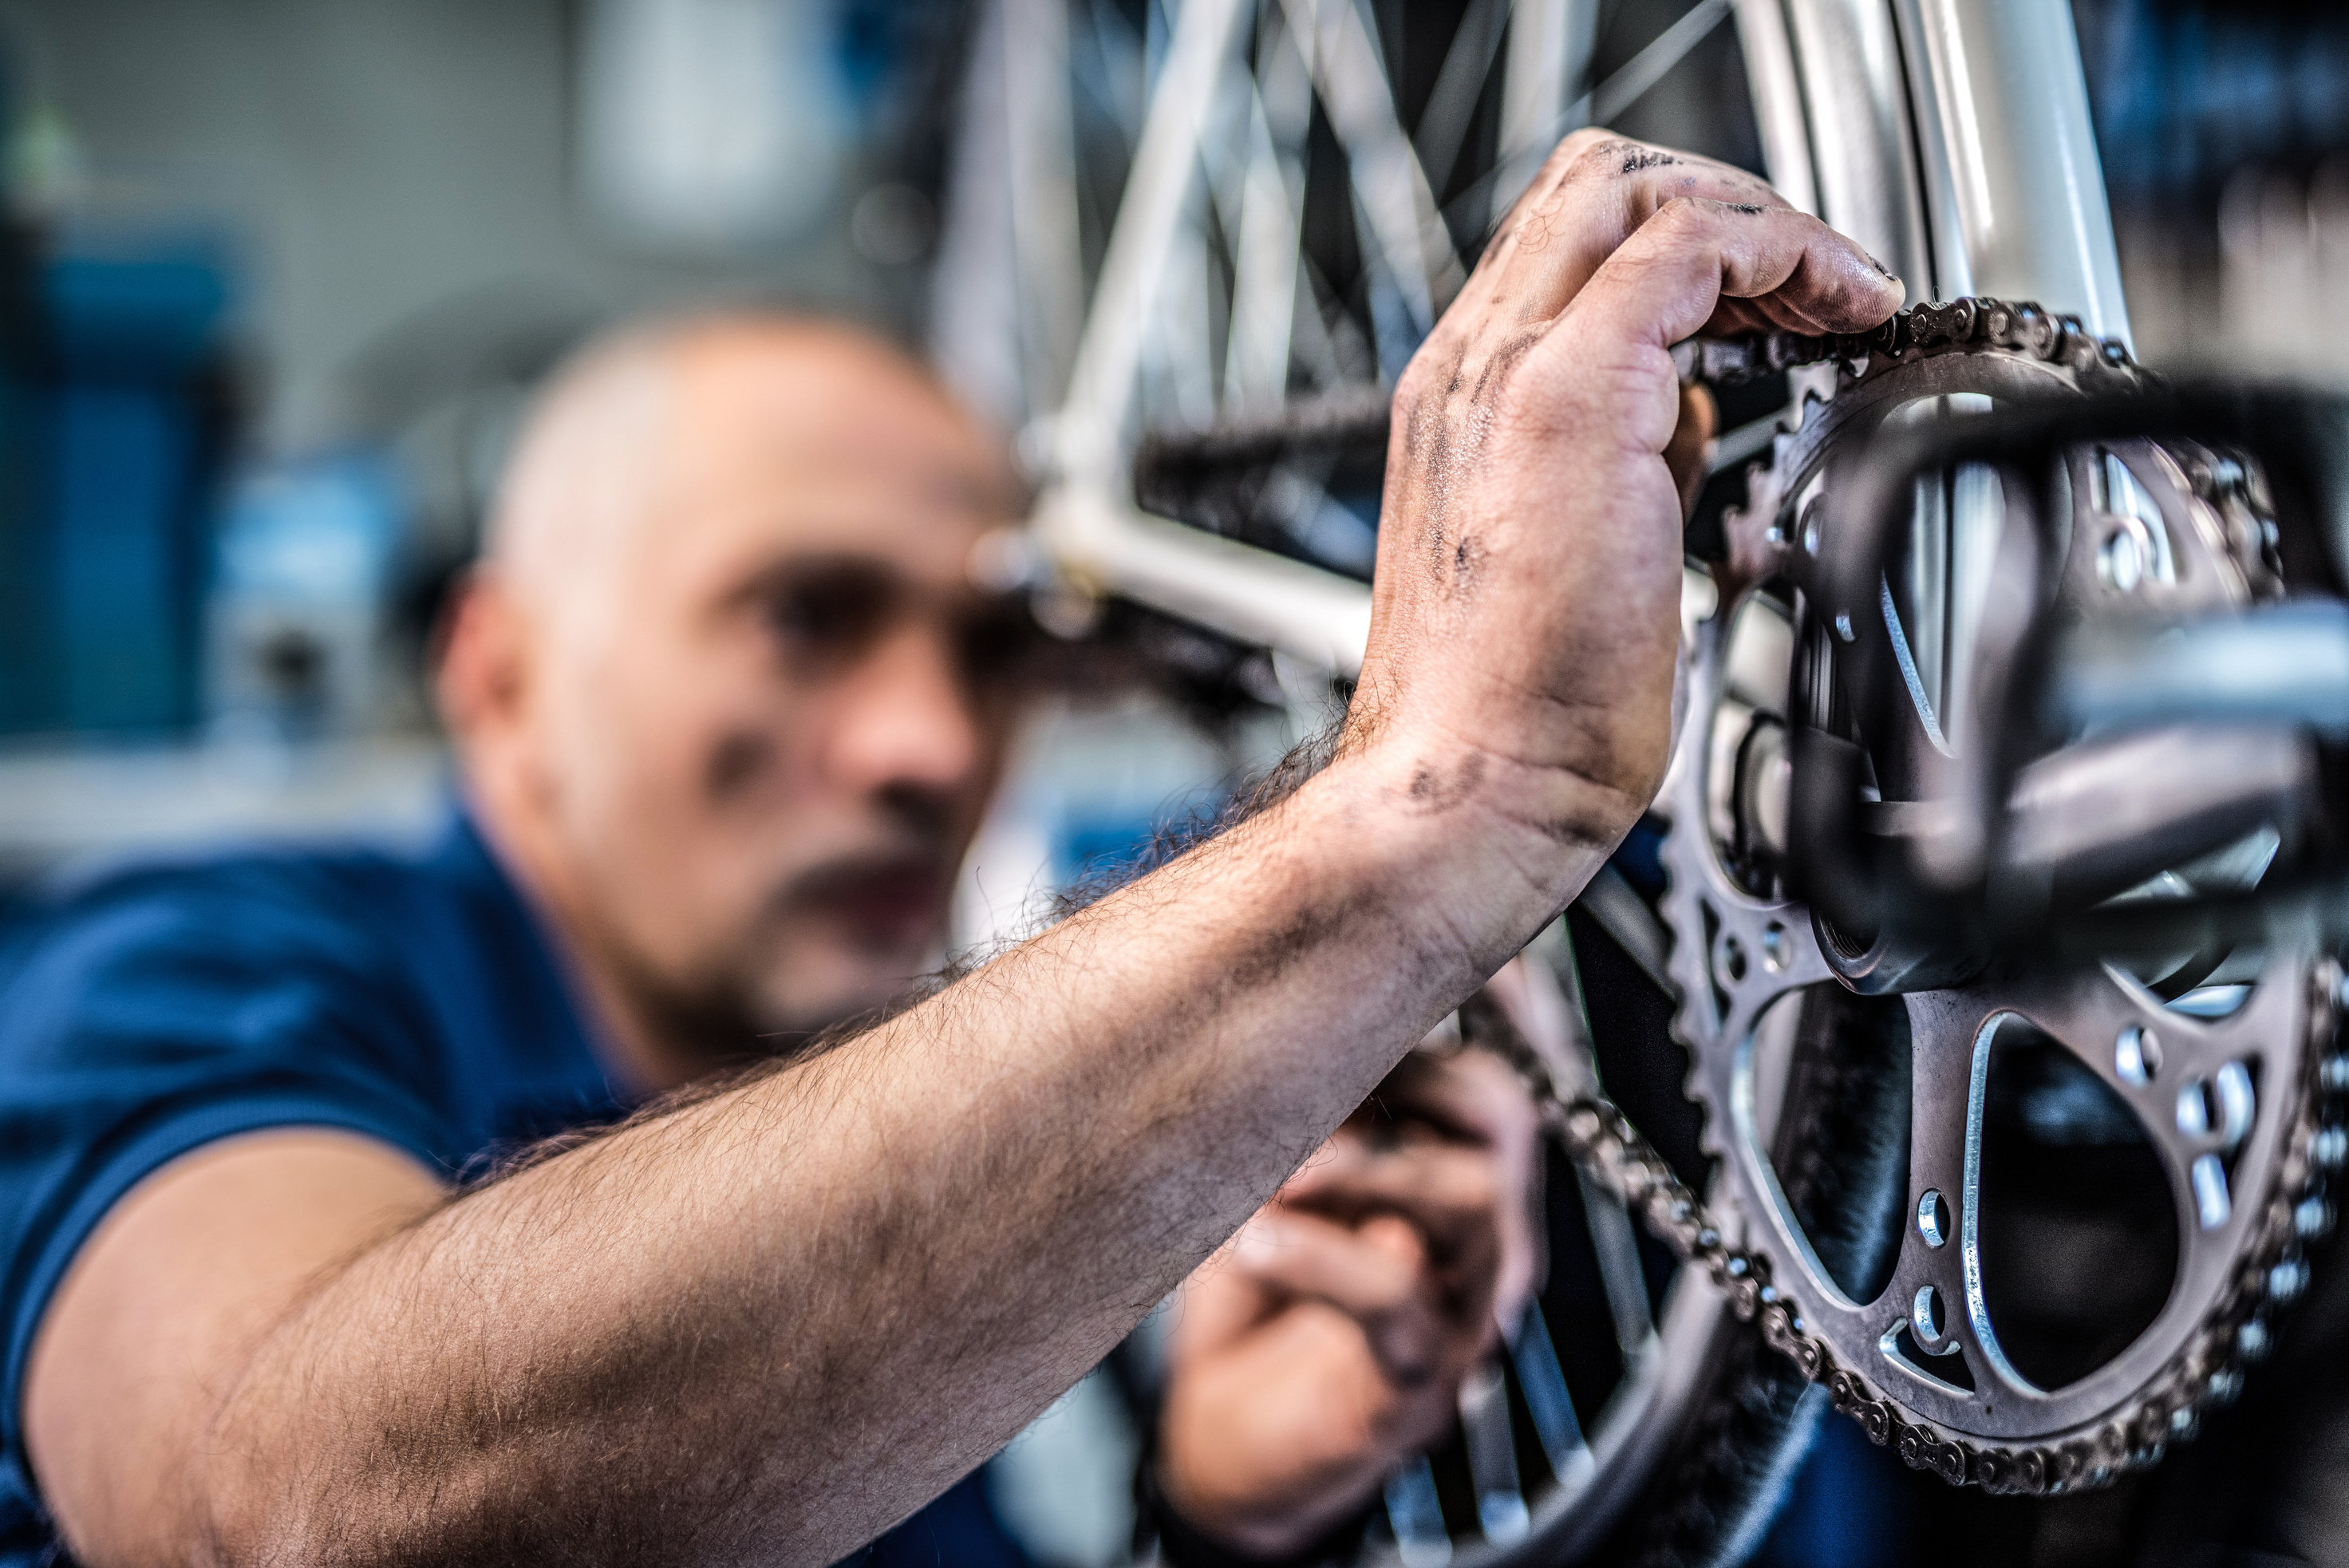 Bicycle technician repairing bicycle transmission.